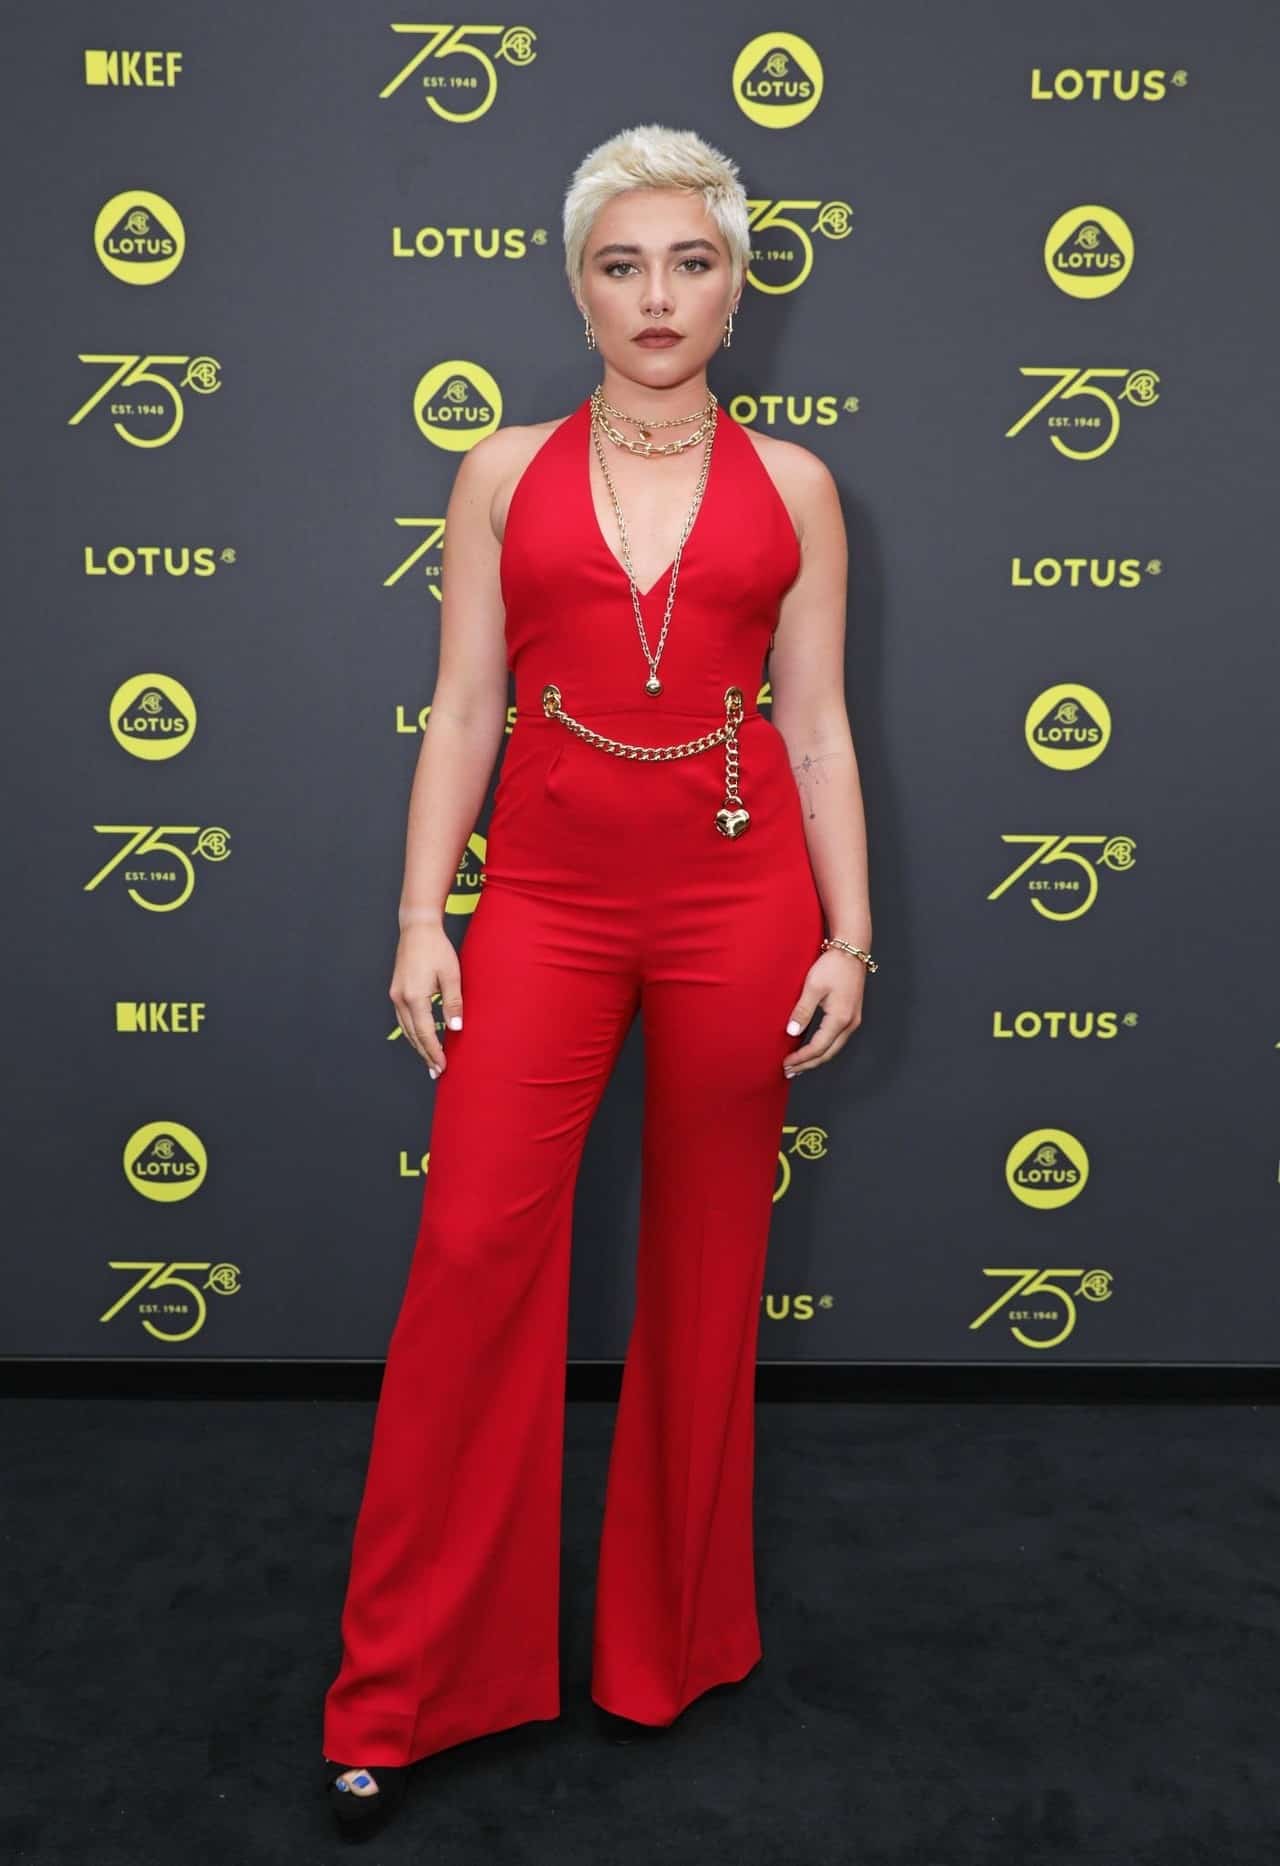 Florence Pugh Stuns in Fiery Red Jumpsuit at Lotus London Flagship Opening